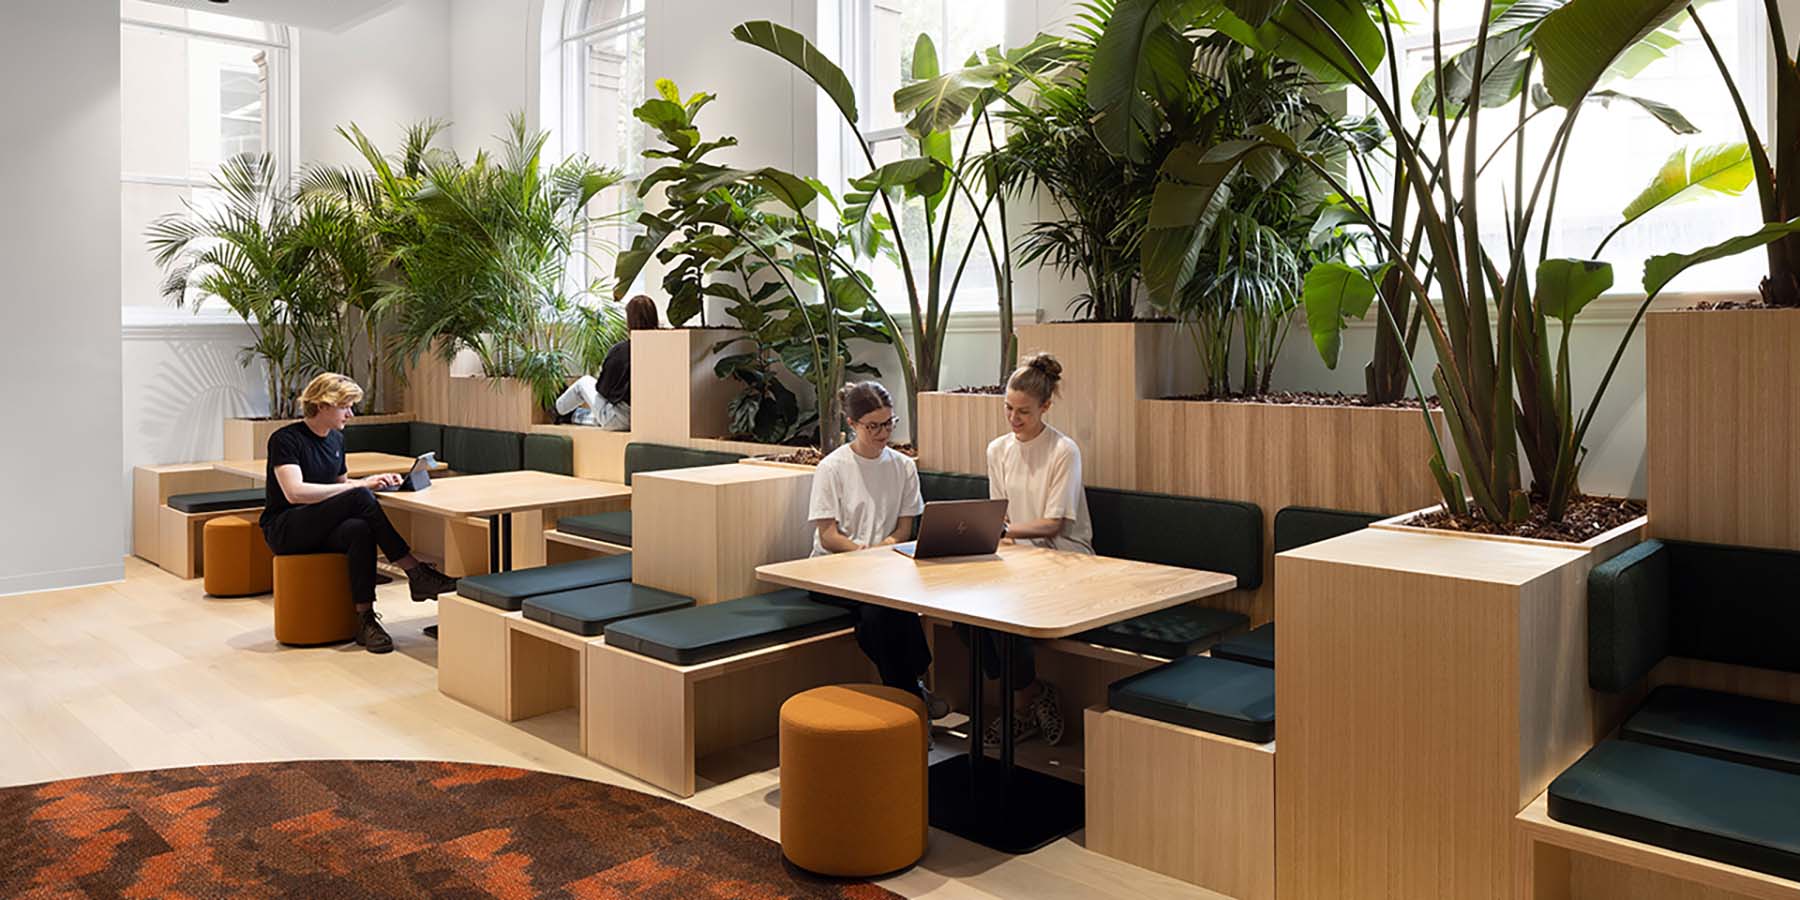 Flexible seating area with booths, stools, tables. People gathering in the space. Indoor plants and natural light.